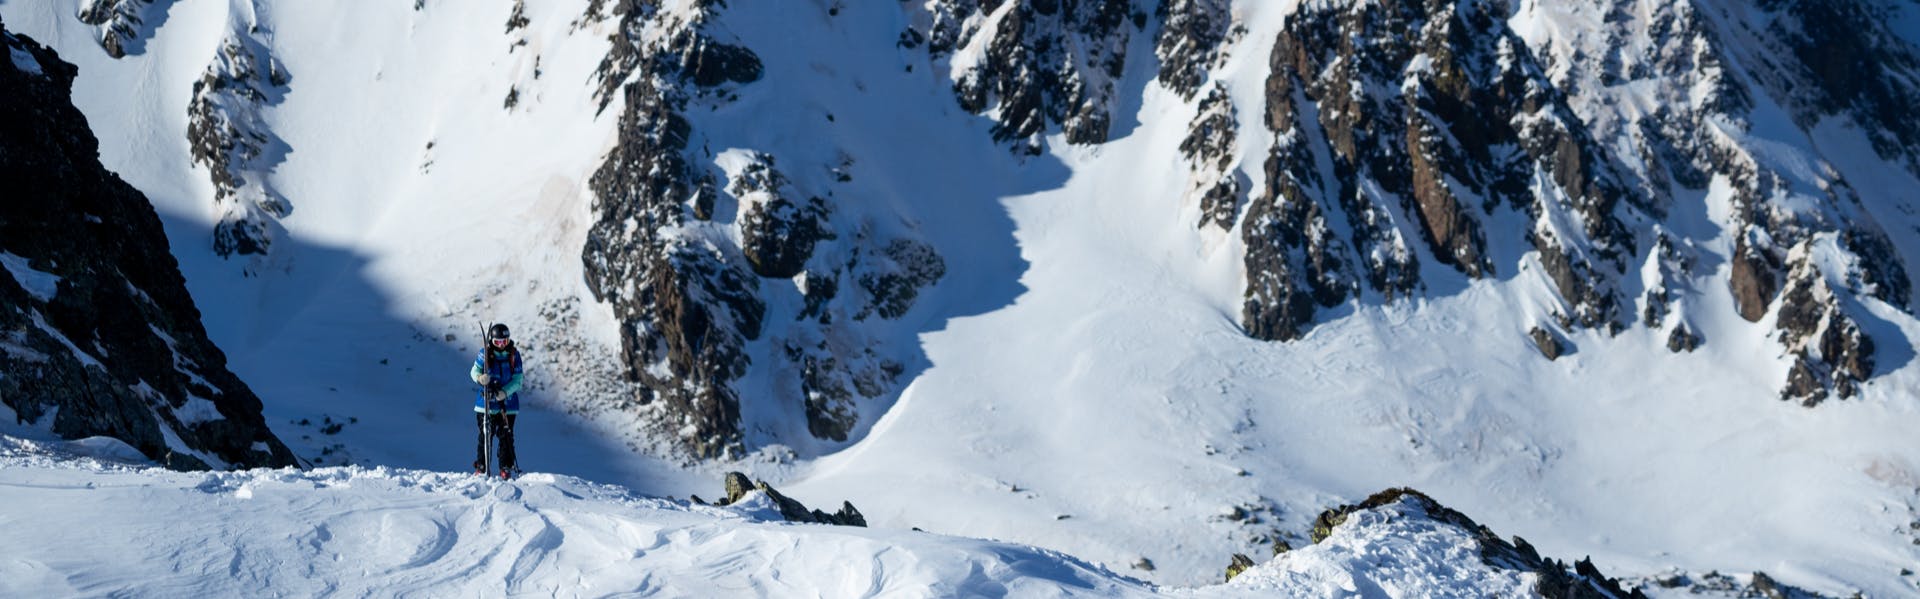 A skier stands on a snowy ridge with a rocky, snowy mountain behind him.